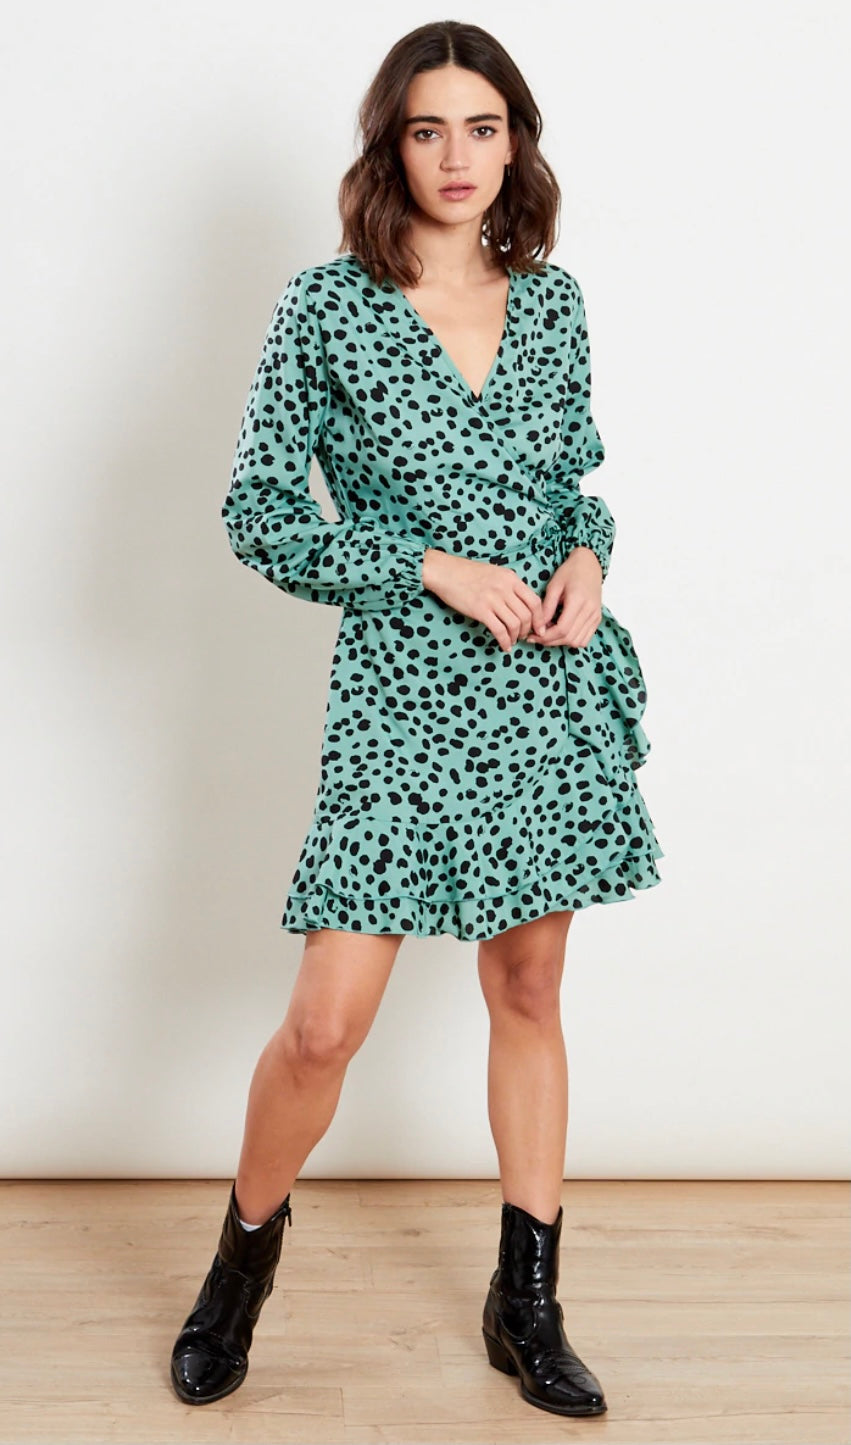 Dark mint green animal printed dress with wrap top, frill skirt and self fabric belt